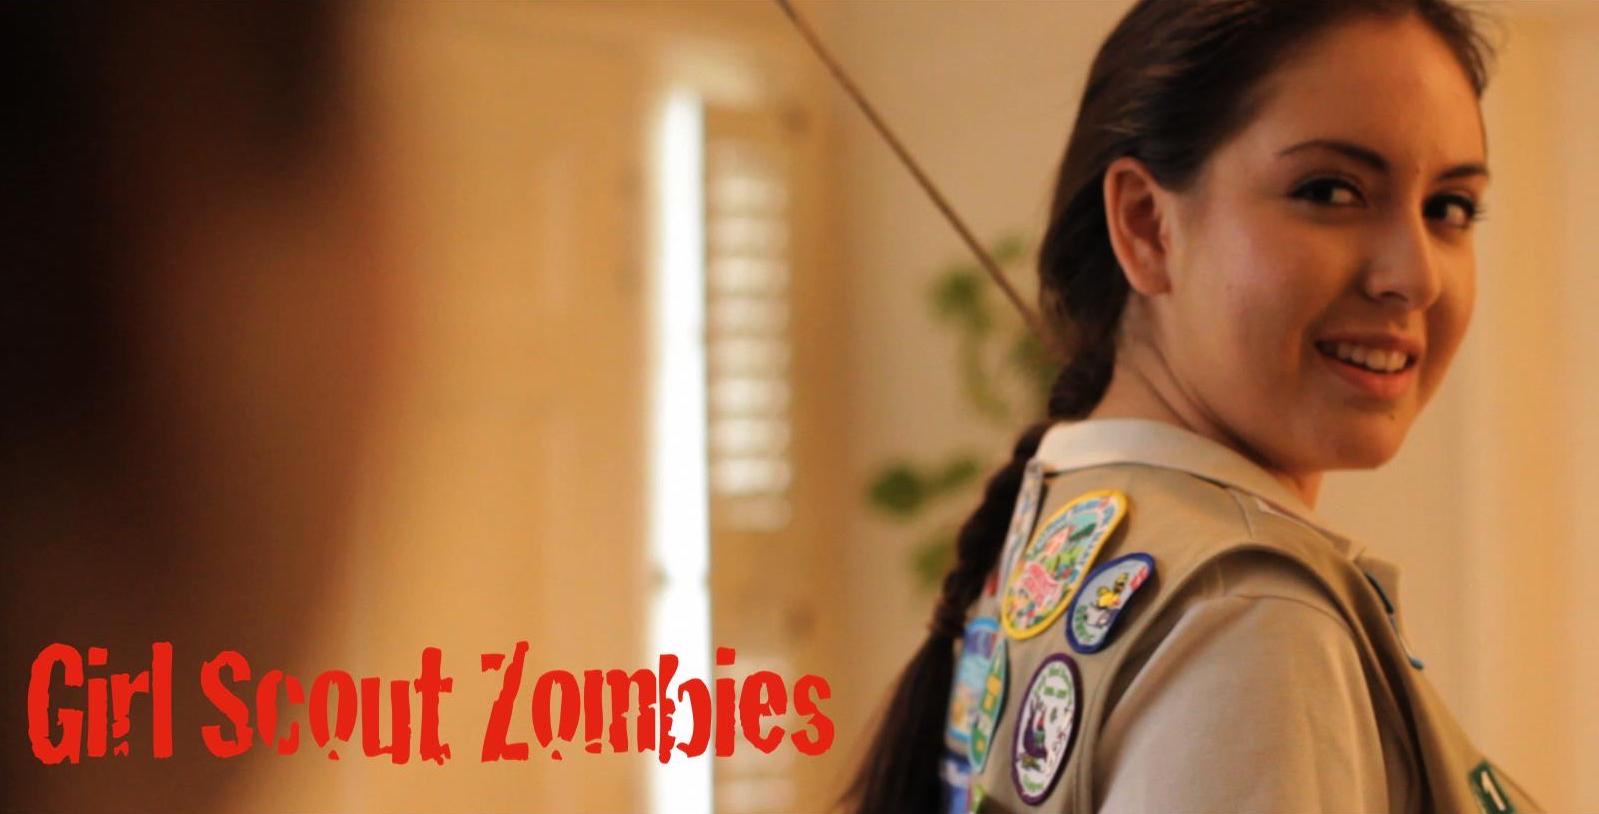 Girl Scout Zombies